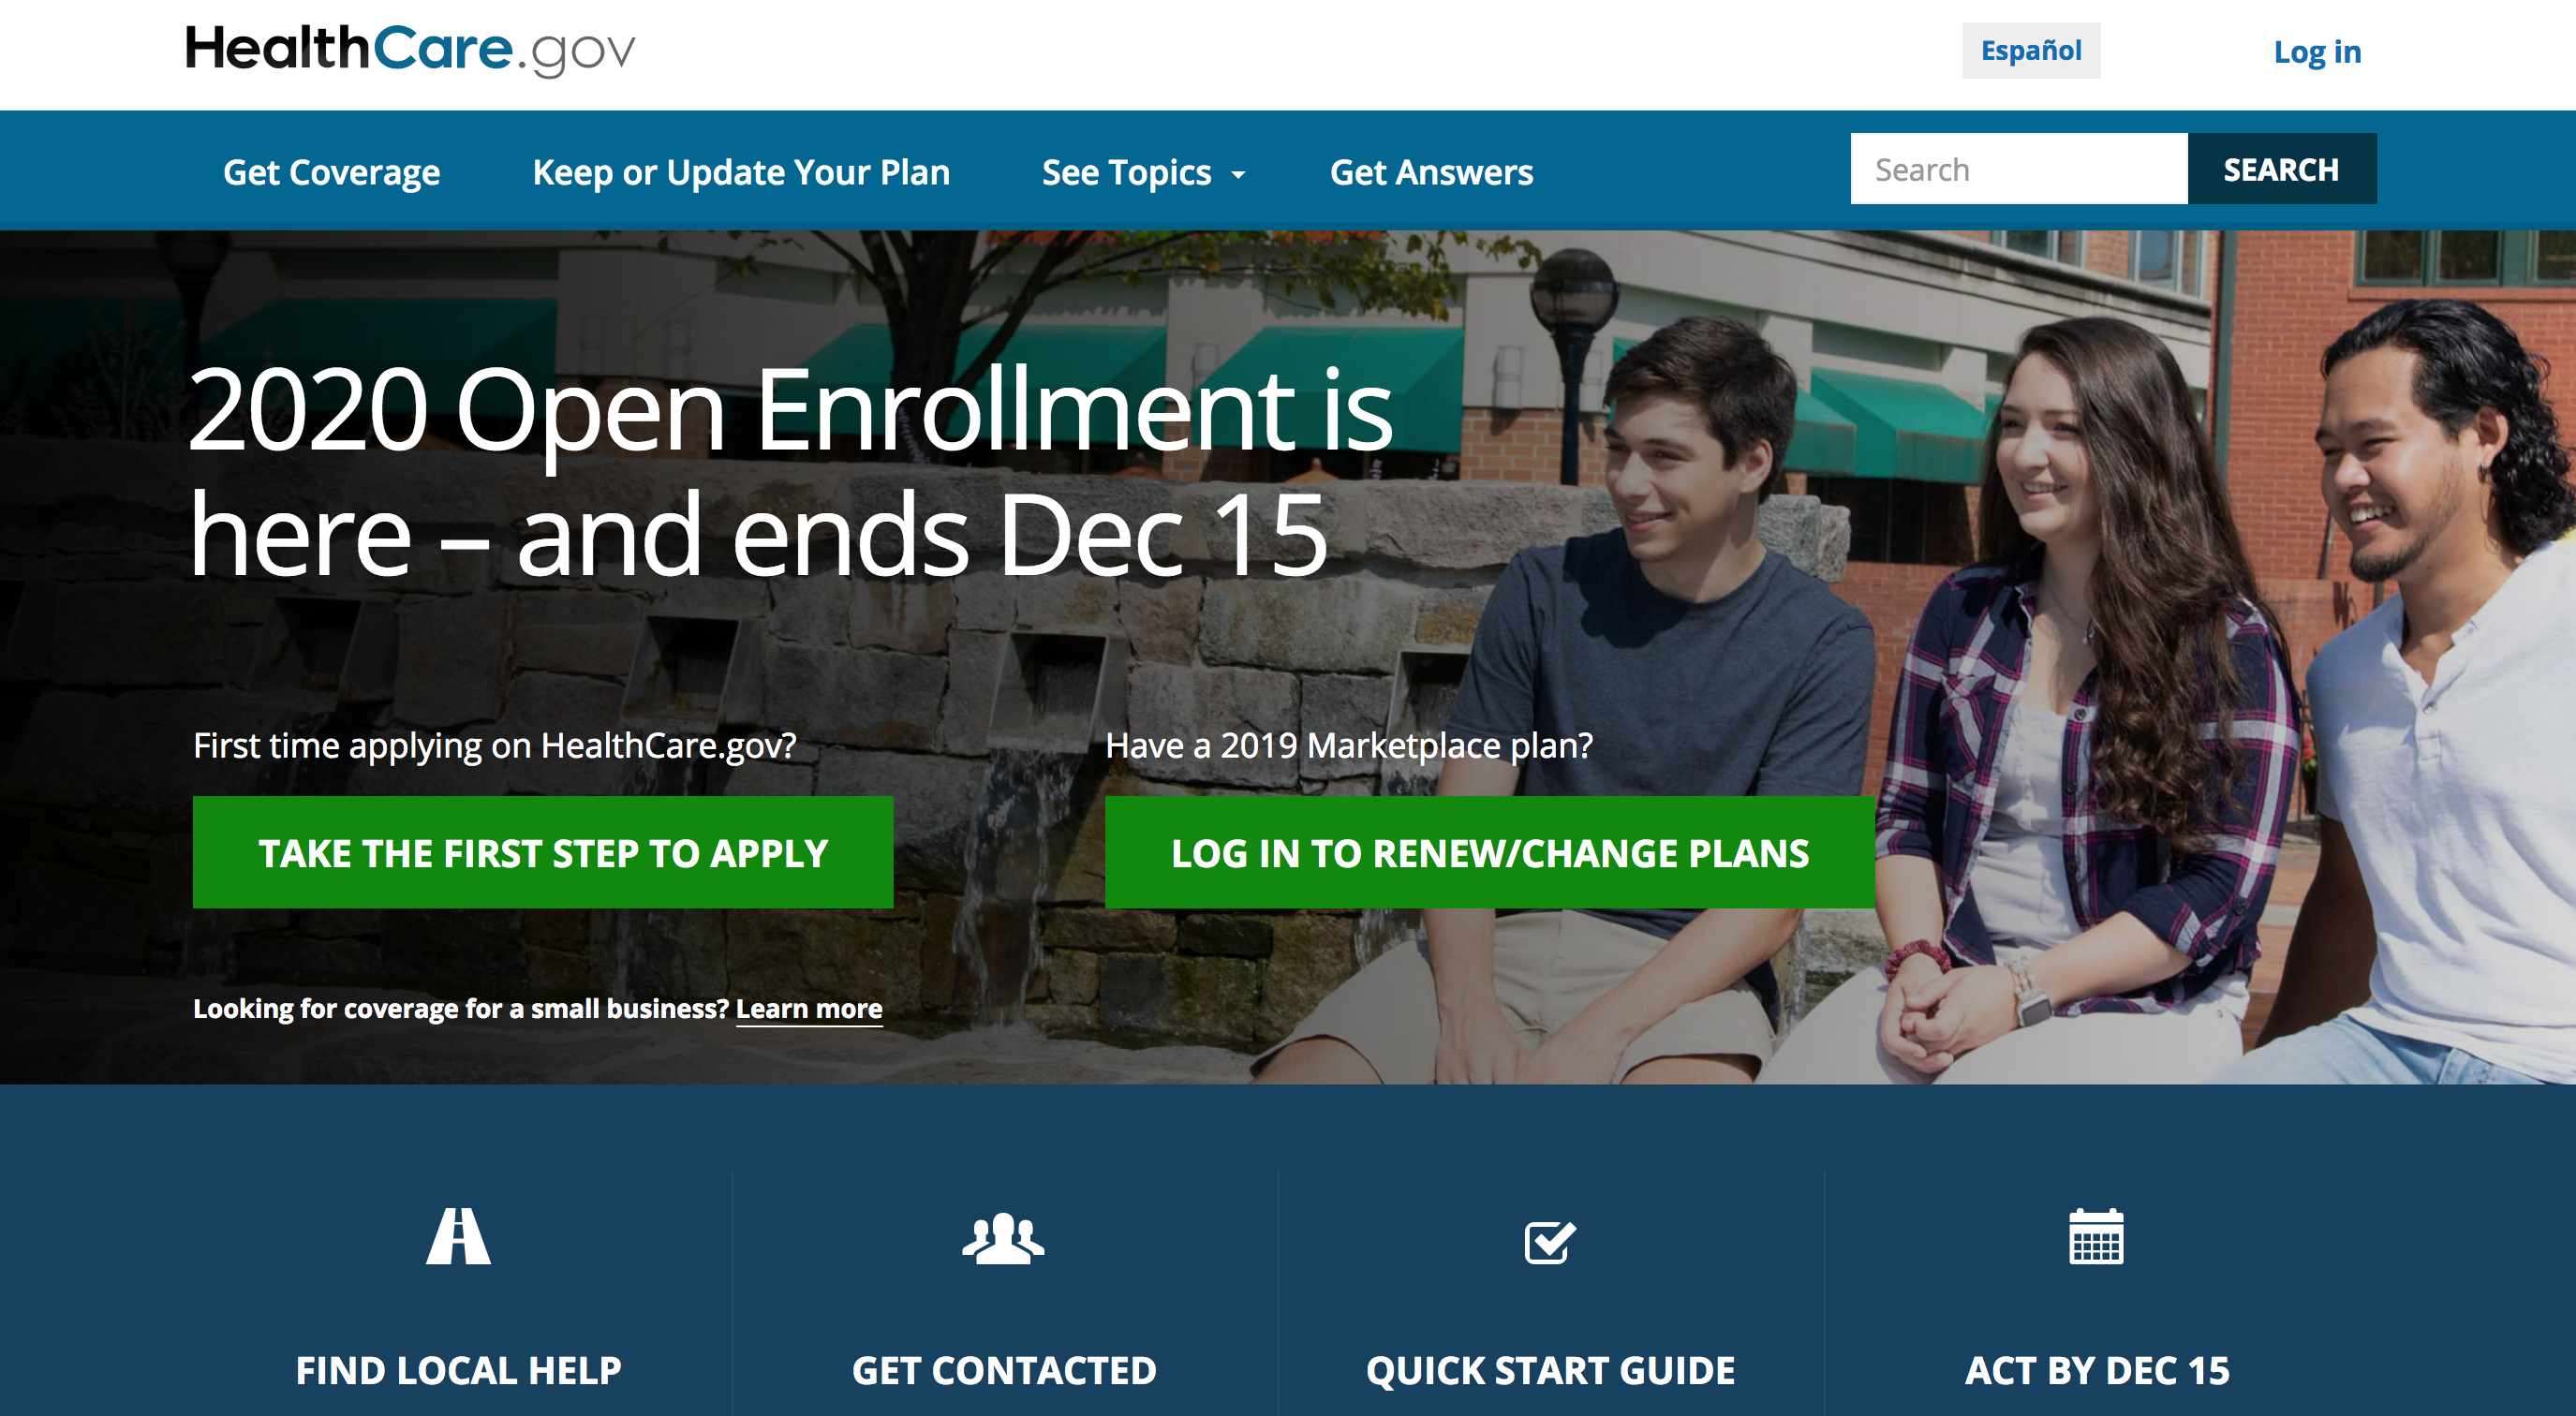 Only Days Left To Enroll In Health Insurance Through Federal Marketplace